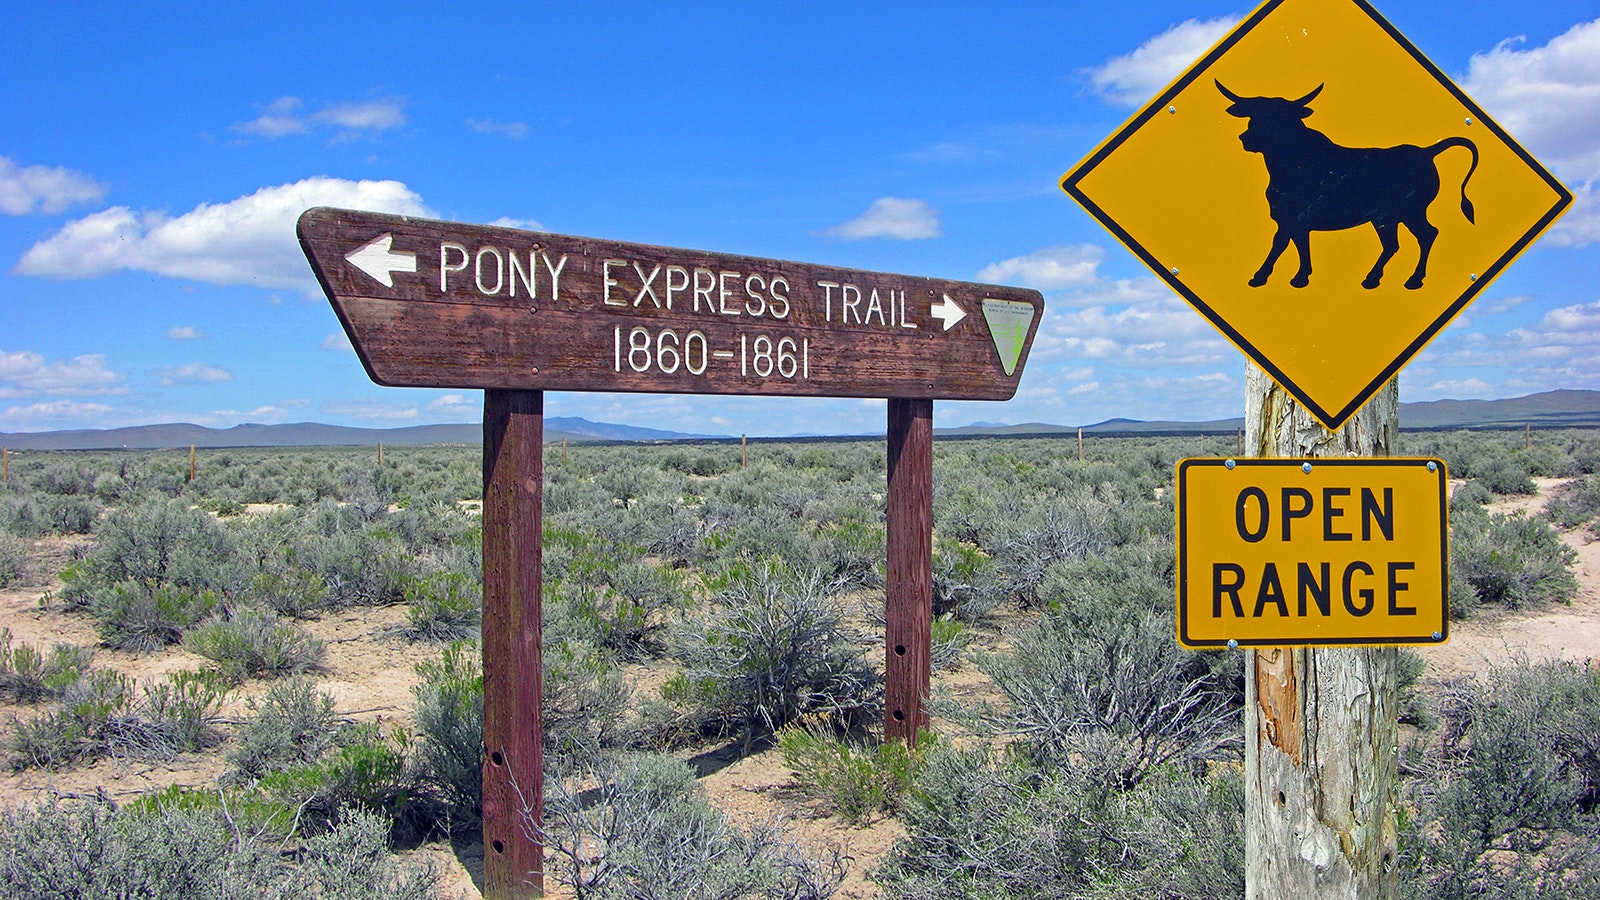 The Pony Express Trail ran 2,000 miles across America, including through Wyoming.